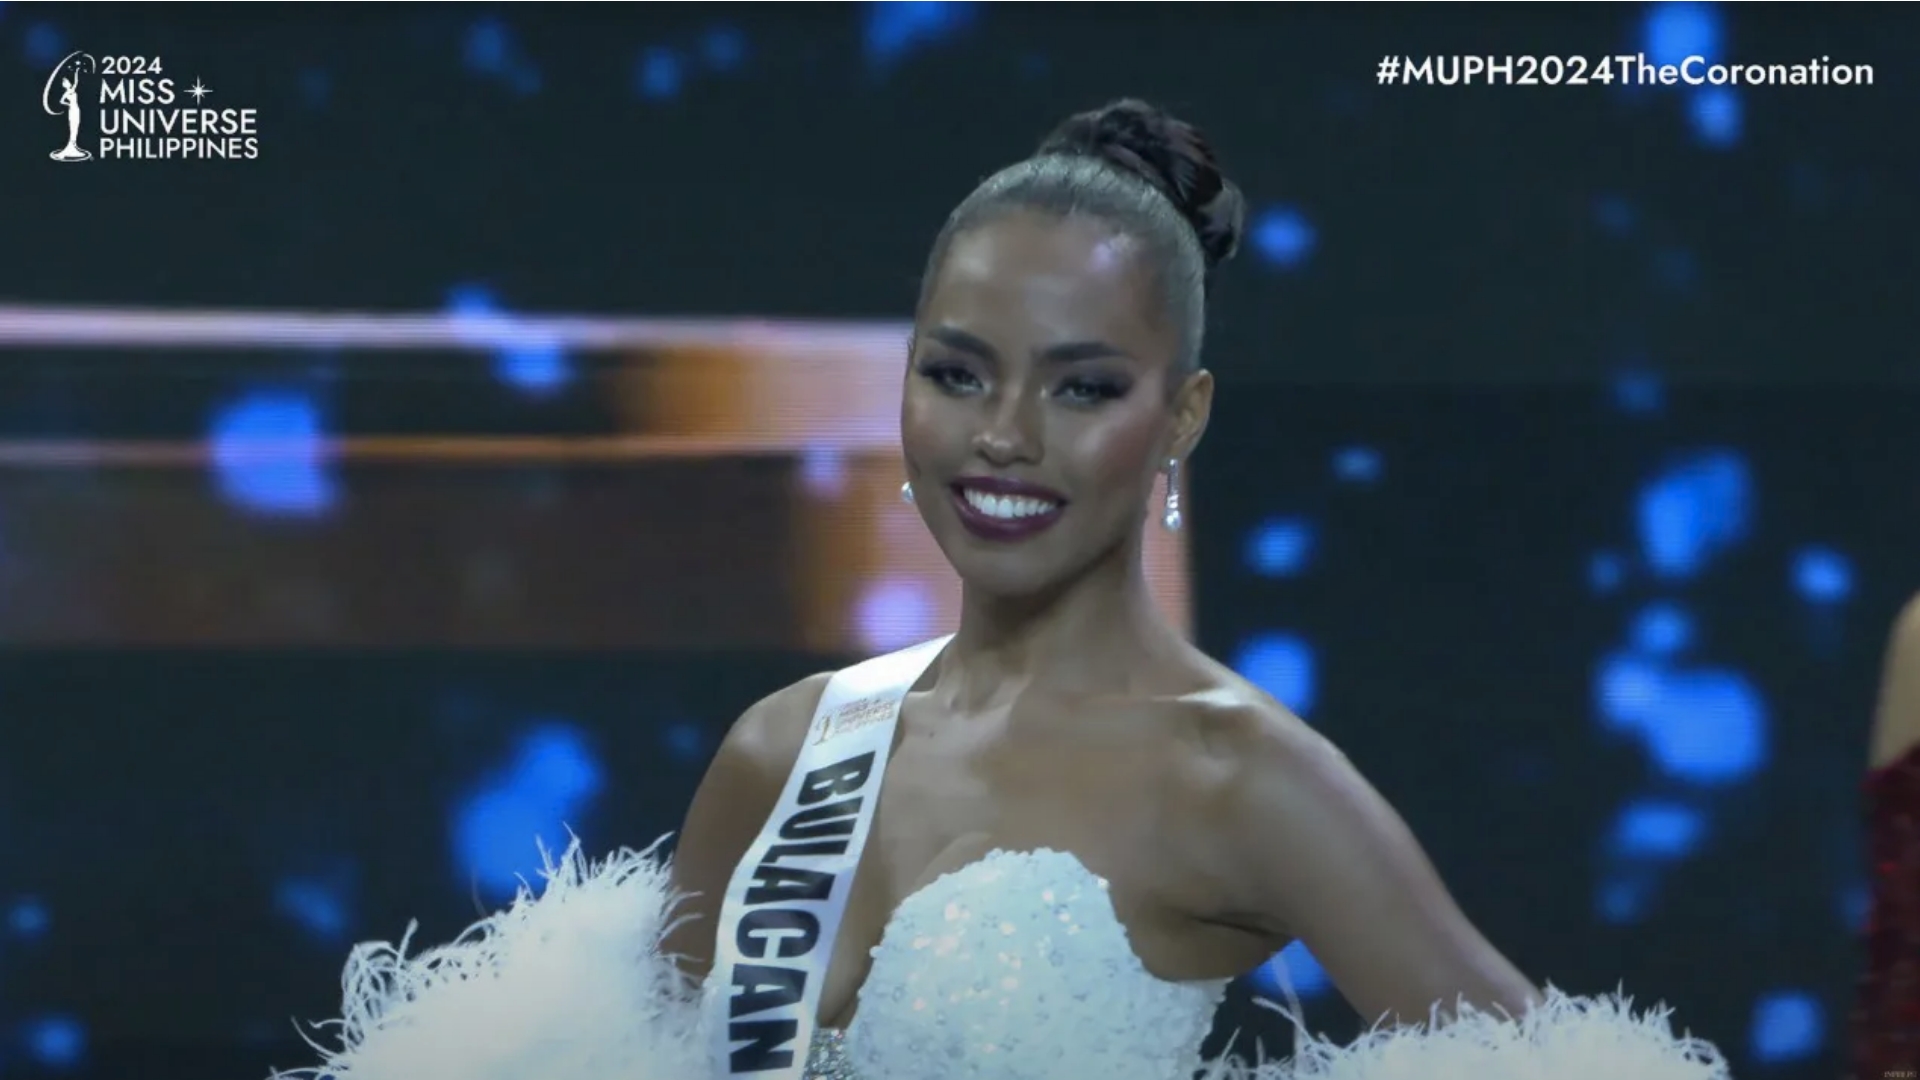 Chelsea Manalo Celebrated by Fellow Beauty Queens as She Begins Reign as Miss Universe Philippines 2024